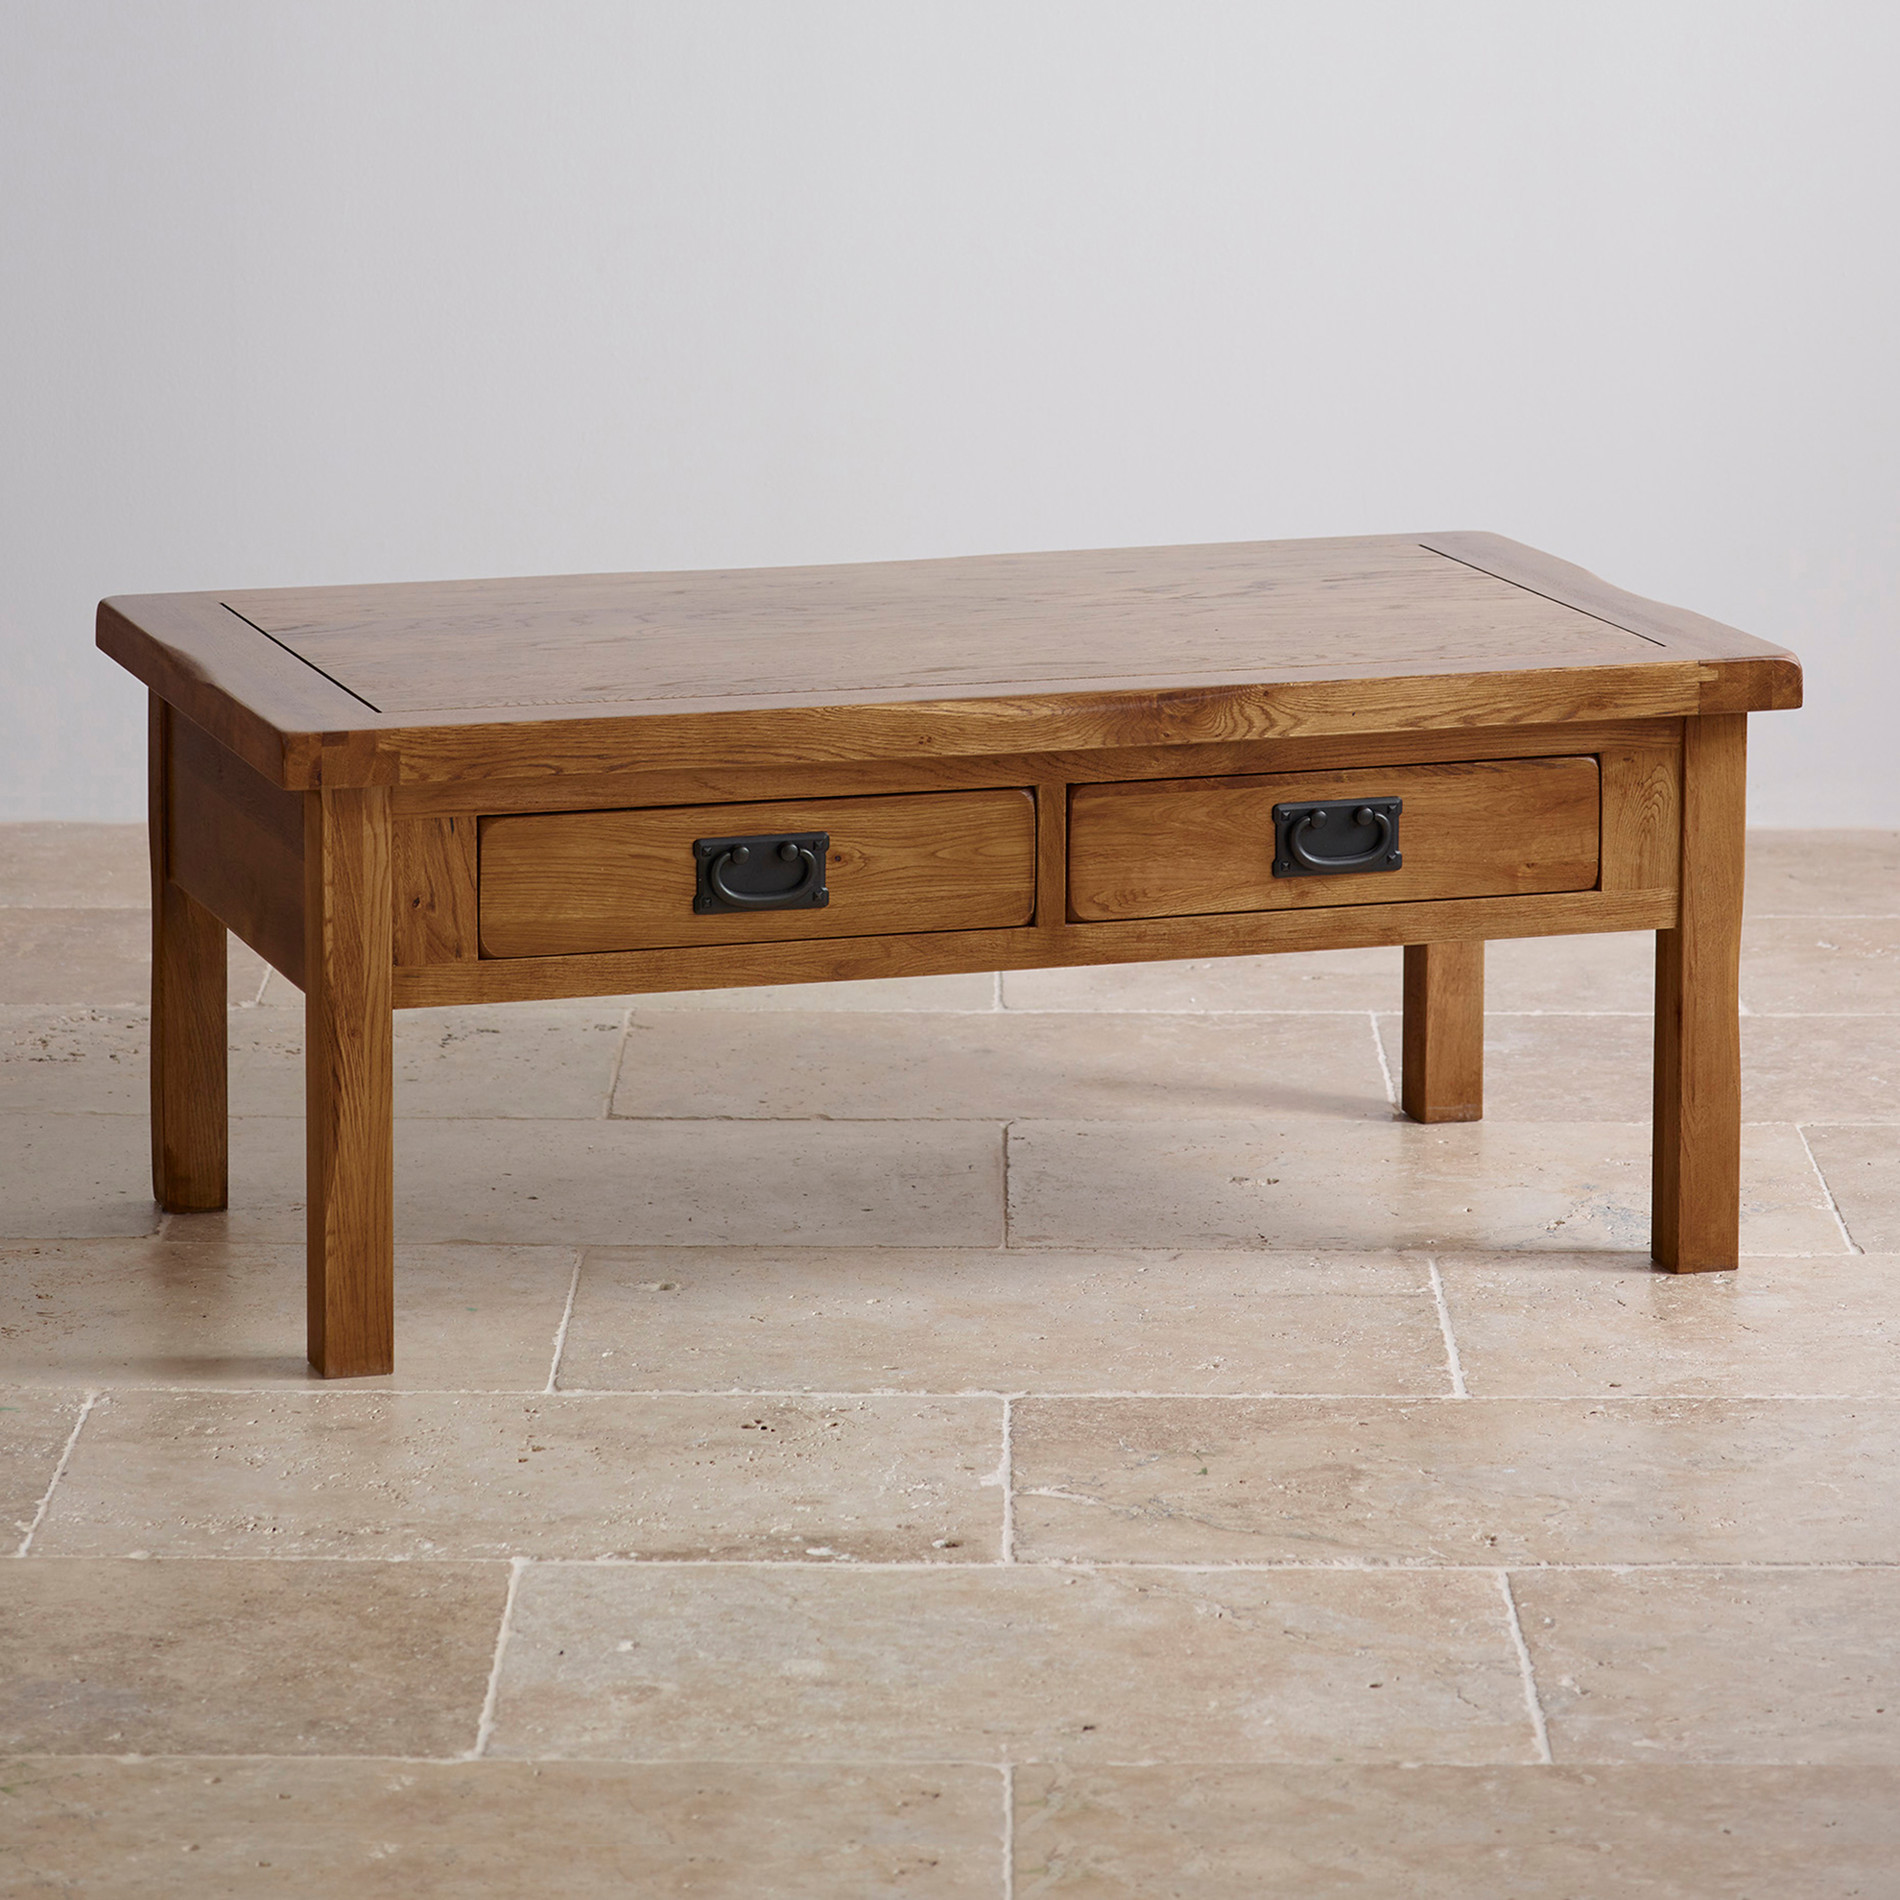 Best ideas about Oak Coffee Table
. Save or Pin What Kind Floor Tiles bined With An Oak Coffee Table Now.